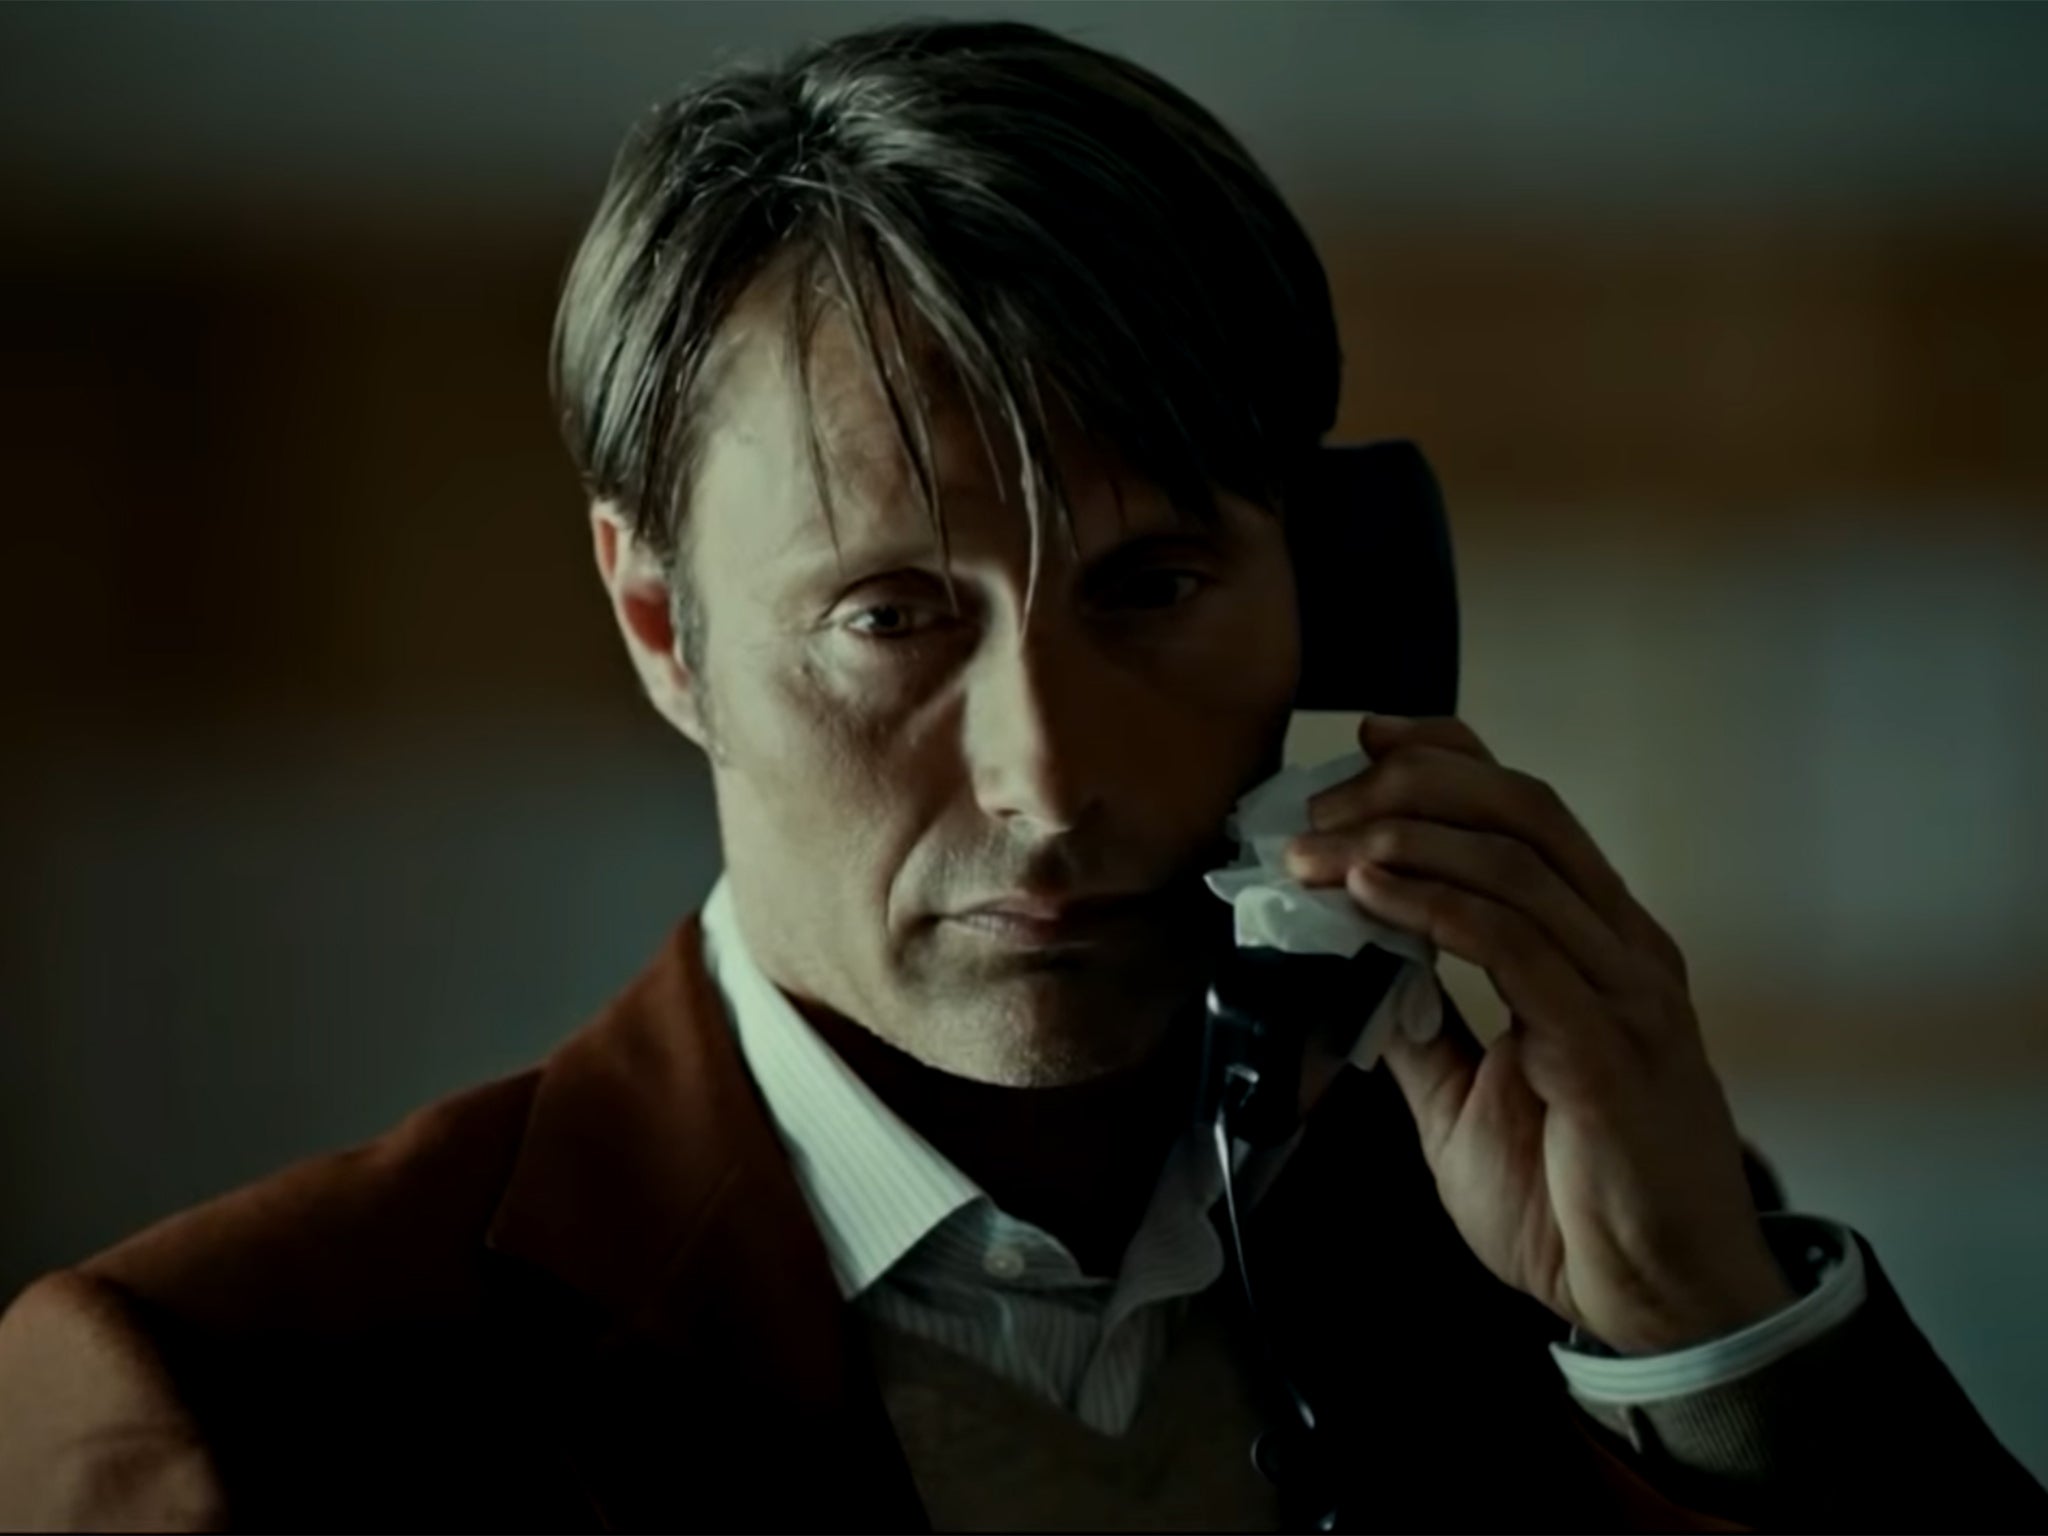 Mads Mikkelsen as Hannibal Lecter in the eponymous NBC show, which details the murderer’s early career as a forensic psychiatrist-turned-cannibal